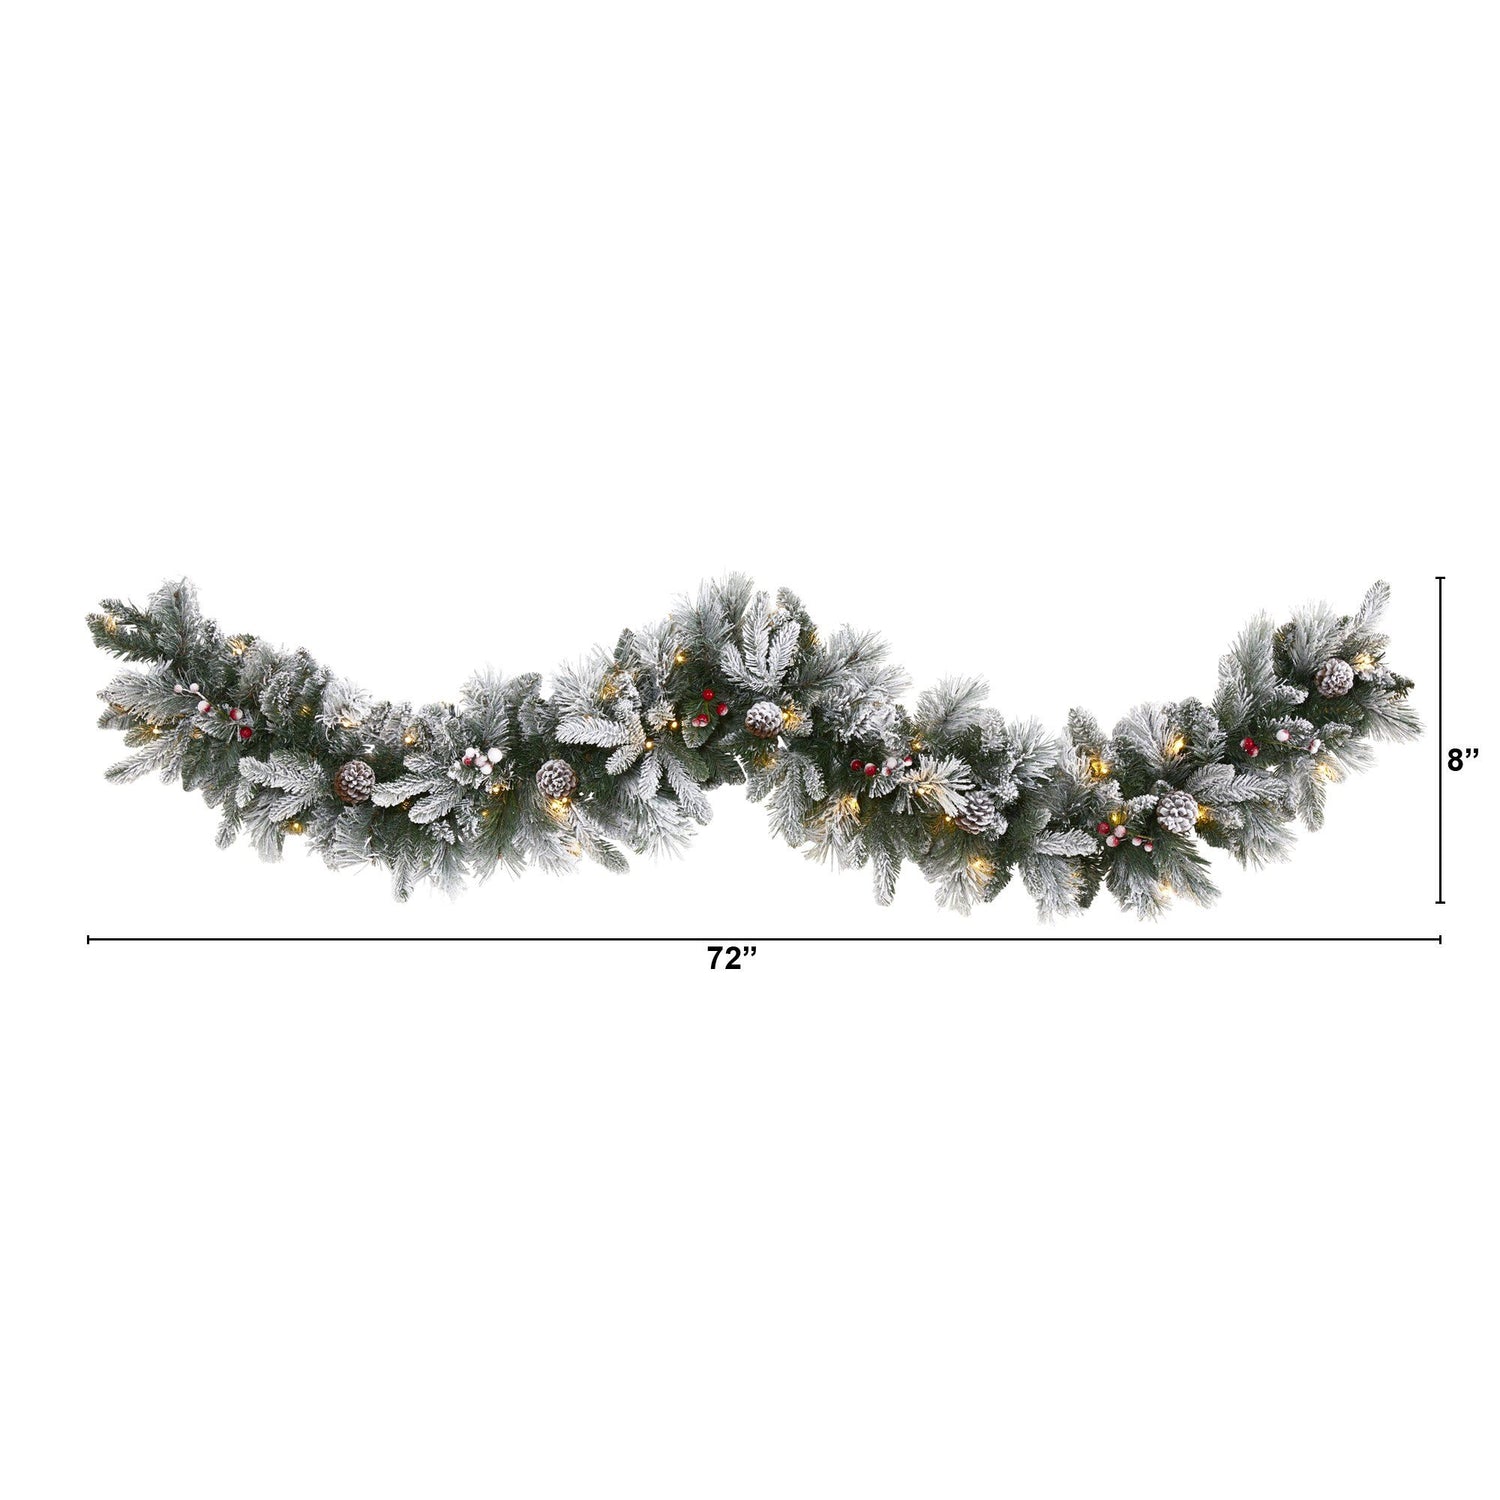 6’ Flocked Mixed Pine Artificial Christmas Garland with 50 LED Lights, Pine Cones and Berries